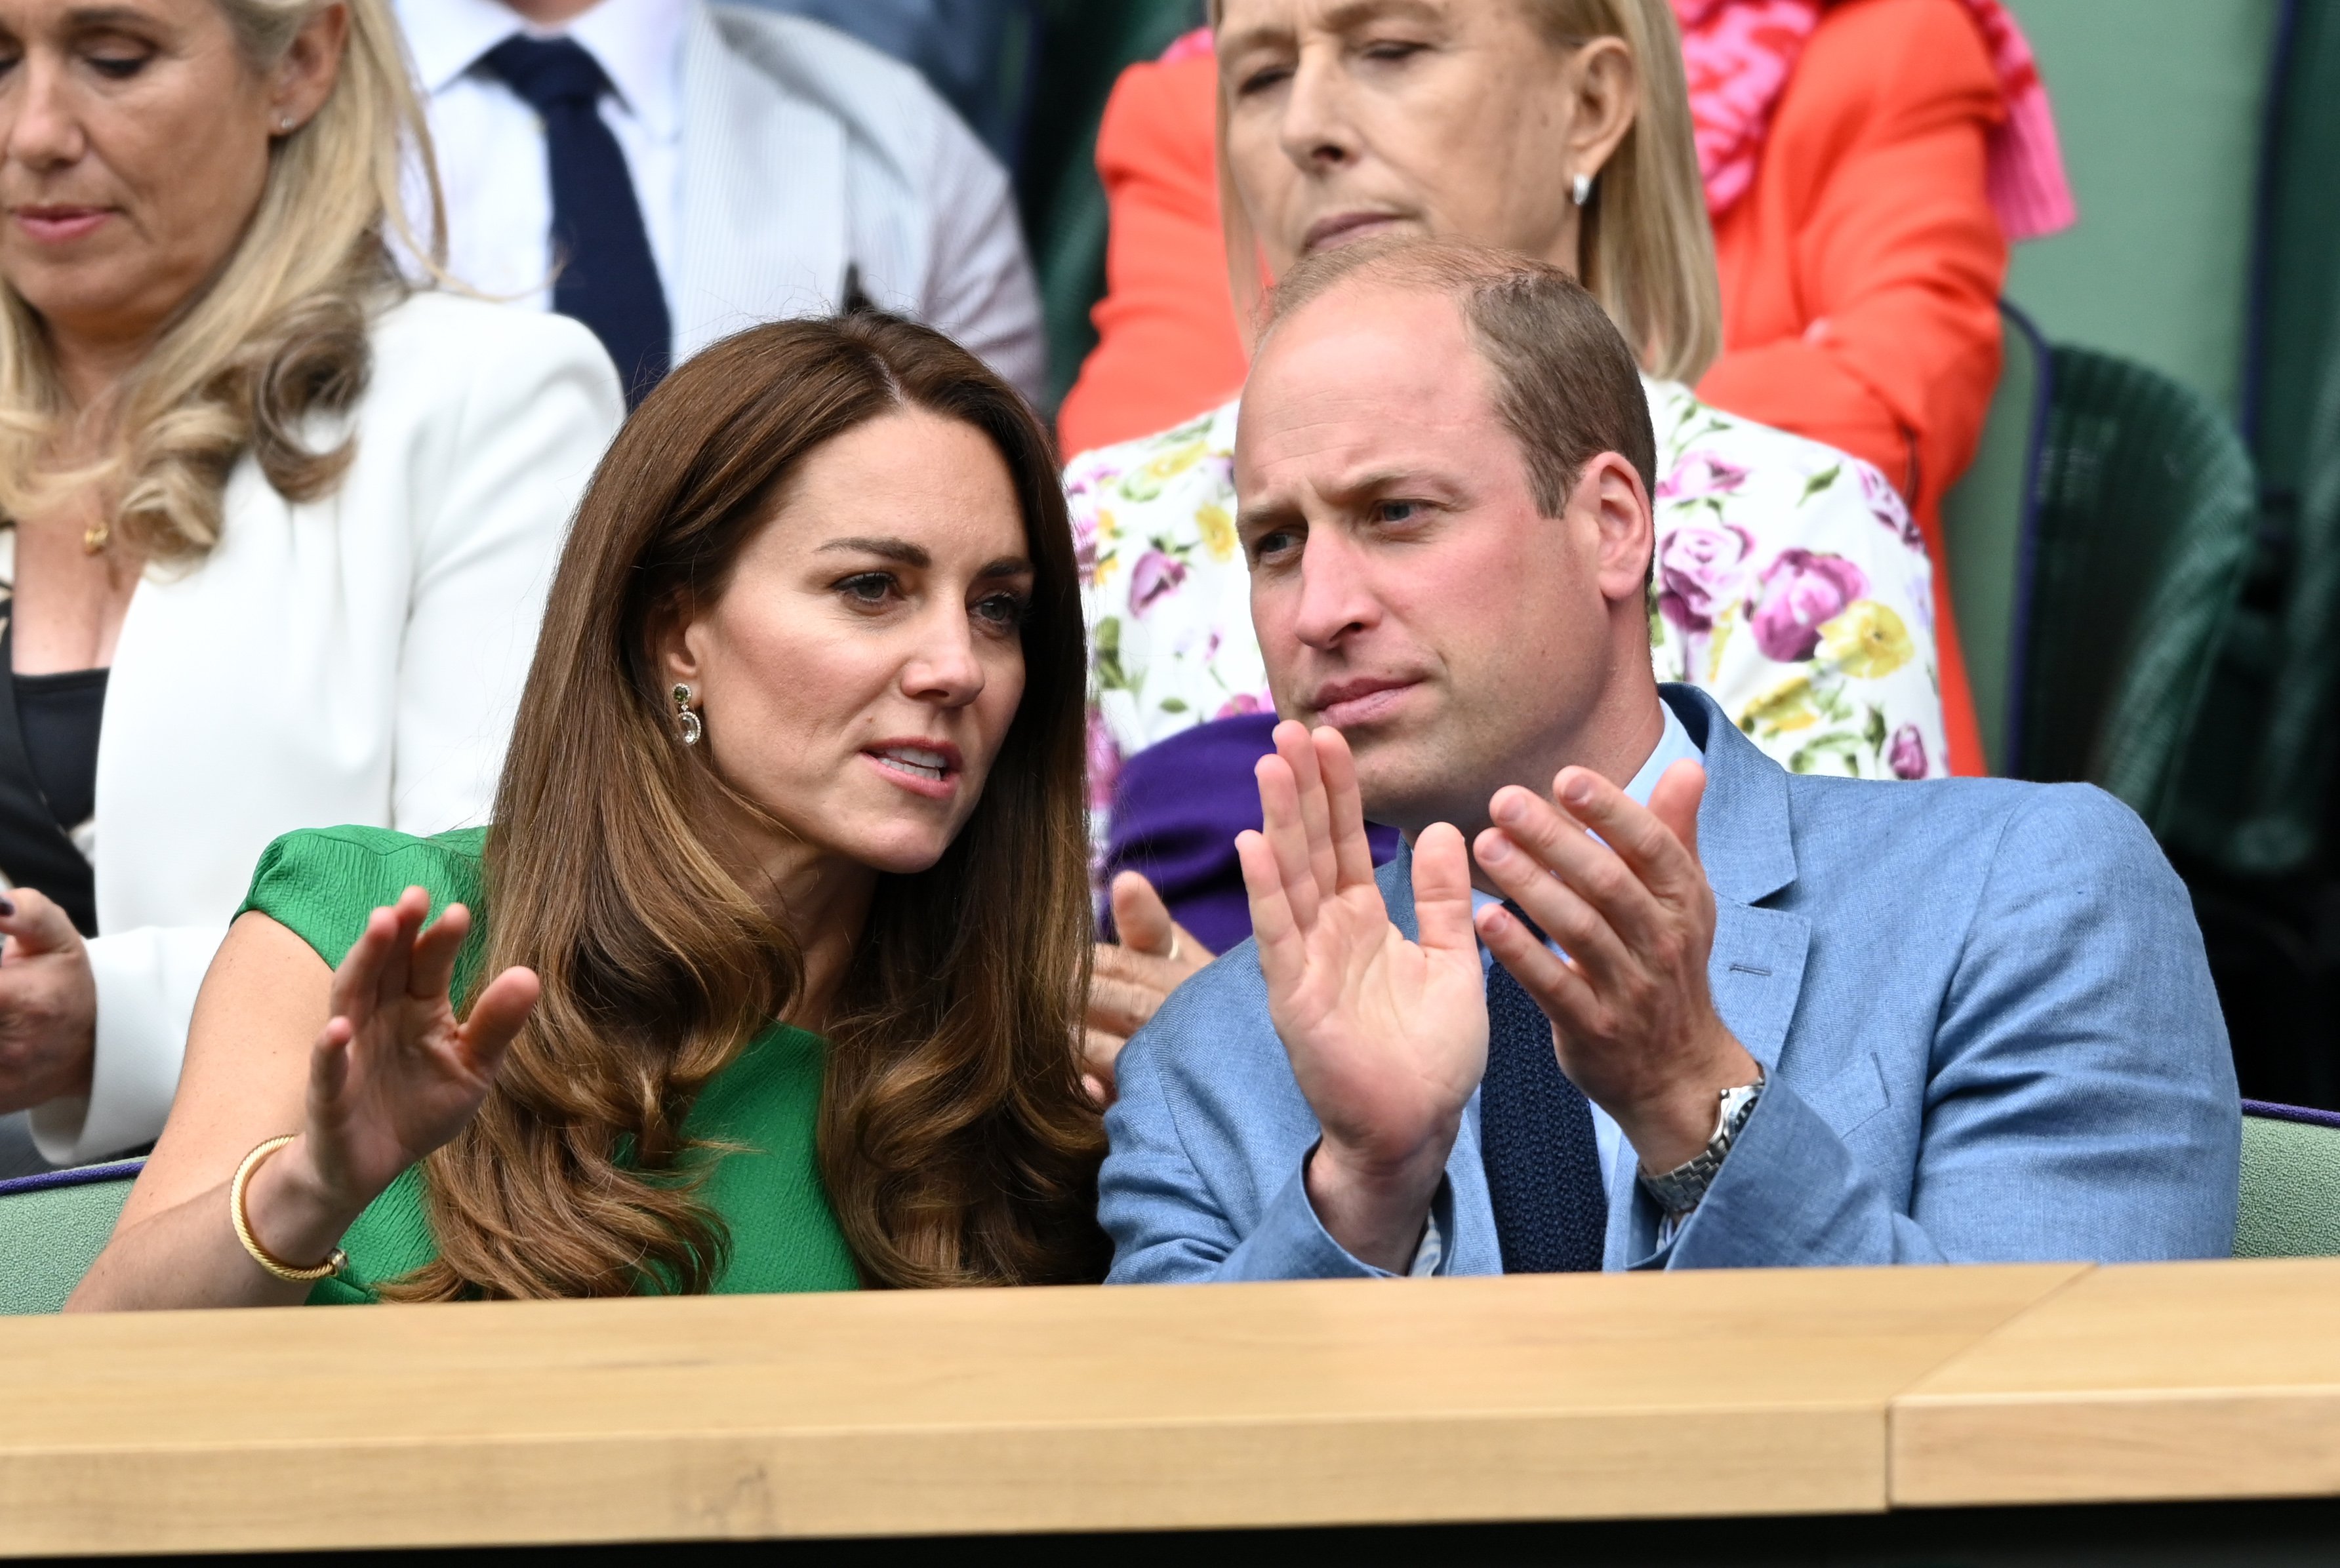 Prince William, and Catherine attend the Wimbledon Tennis Championships at the All England Lawn Tennis and Croquet Club on July 10, 2021 in London, England. | Source: Getty Images